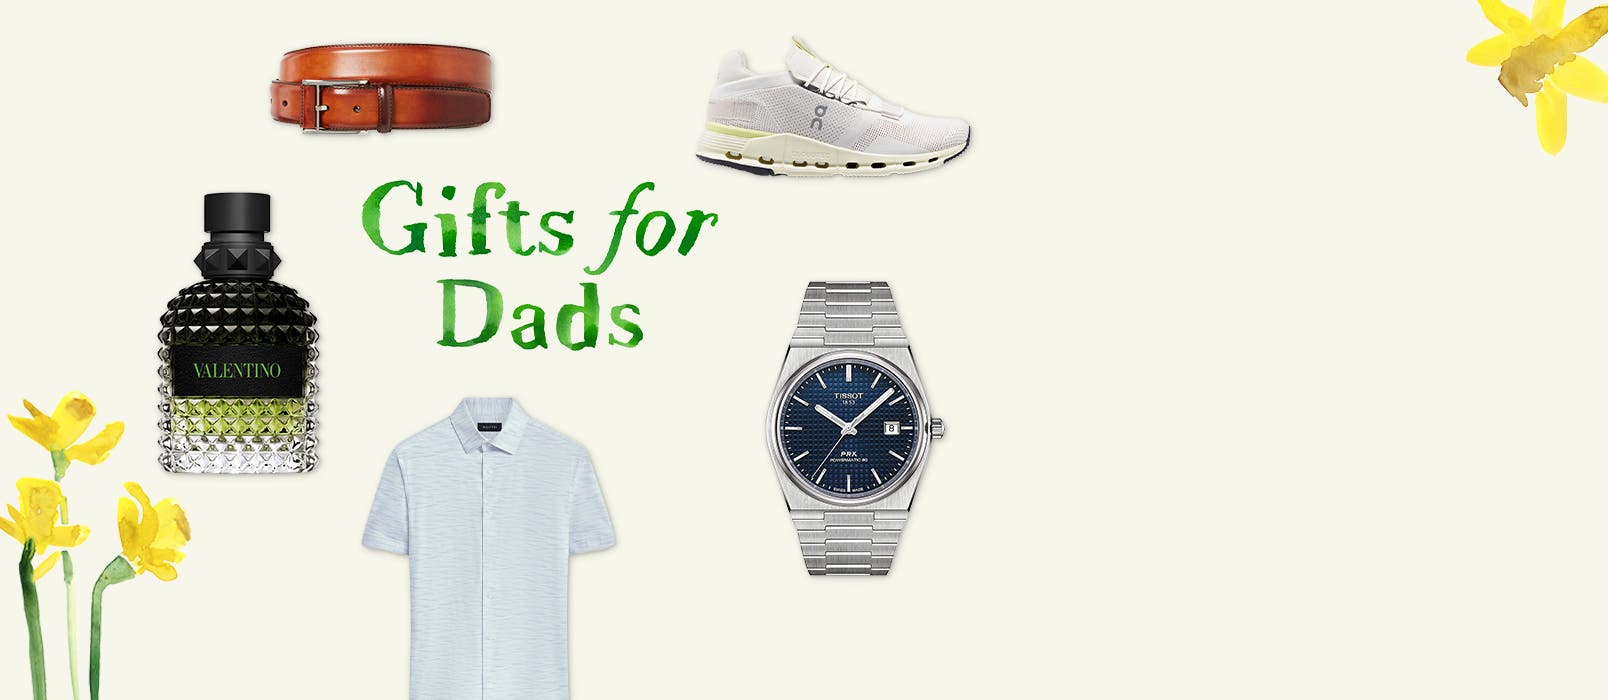 Gifts for dads, including a running shoe, belt and watch.